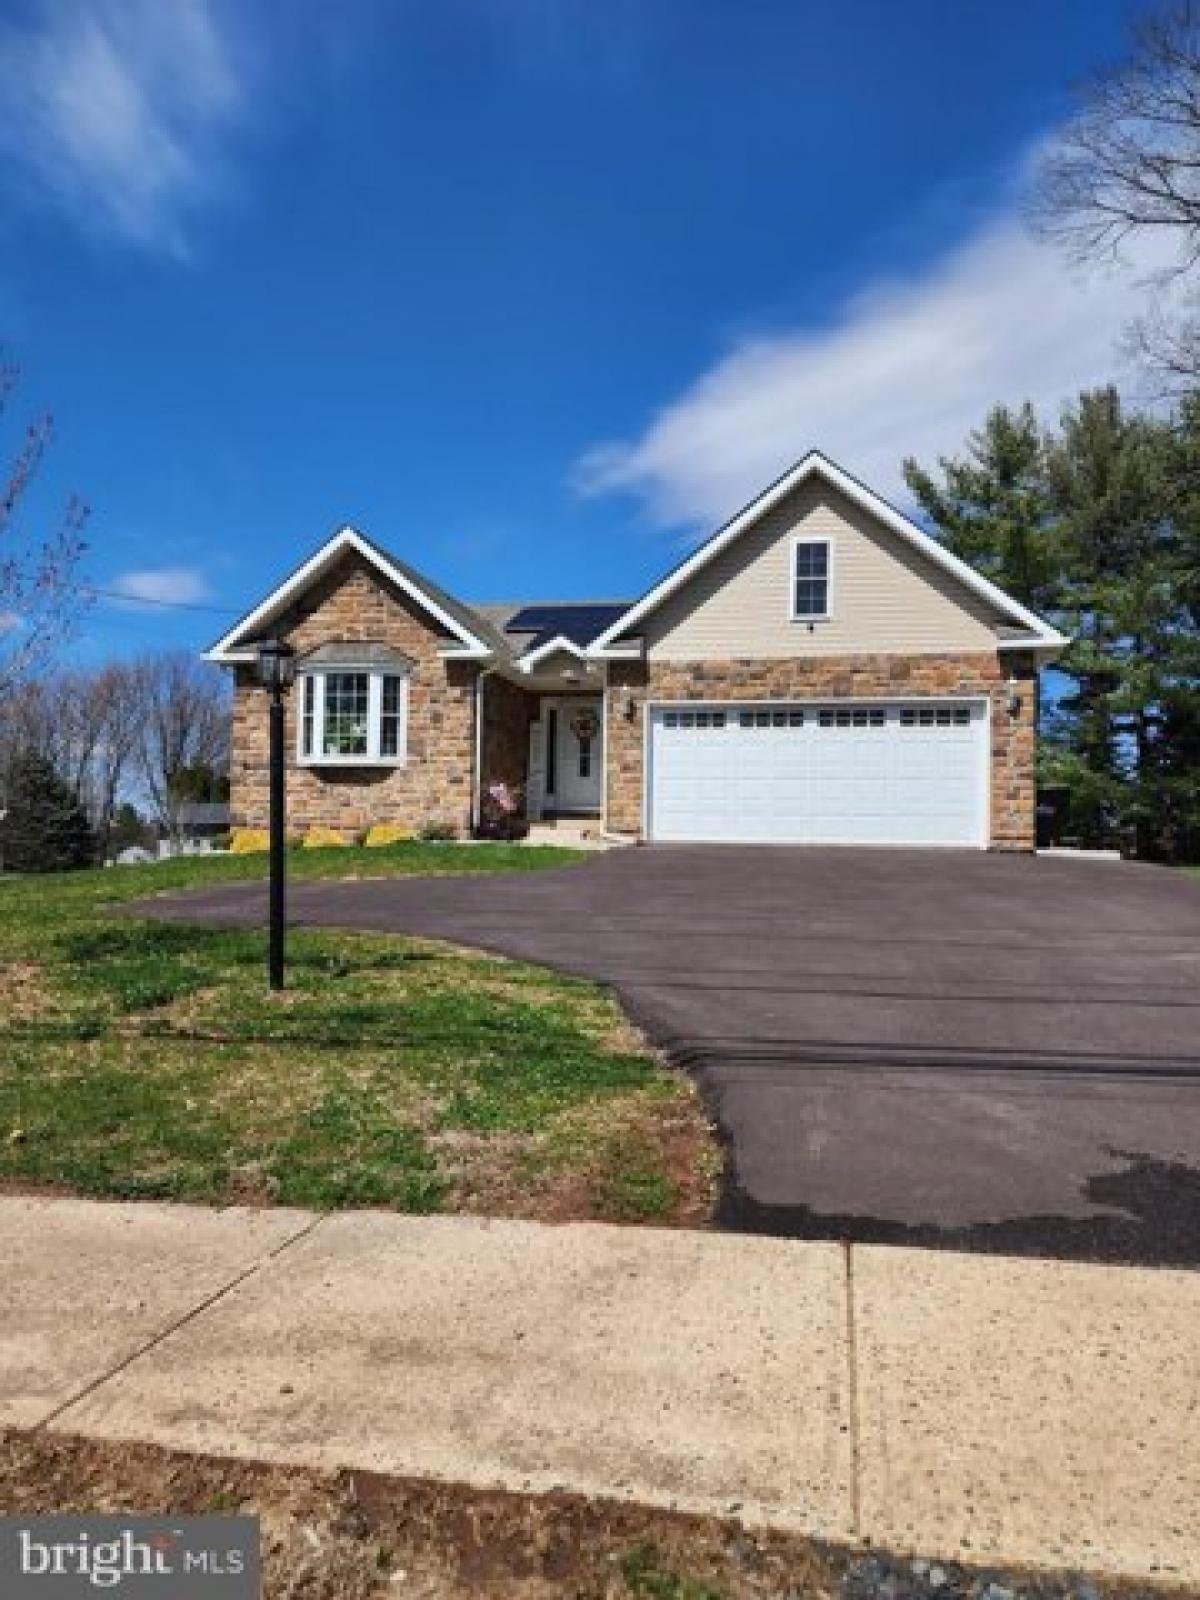 Picture of Home For Sale in Harleysville, Pennsylvania, United States